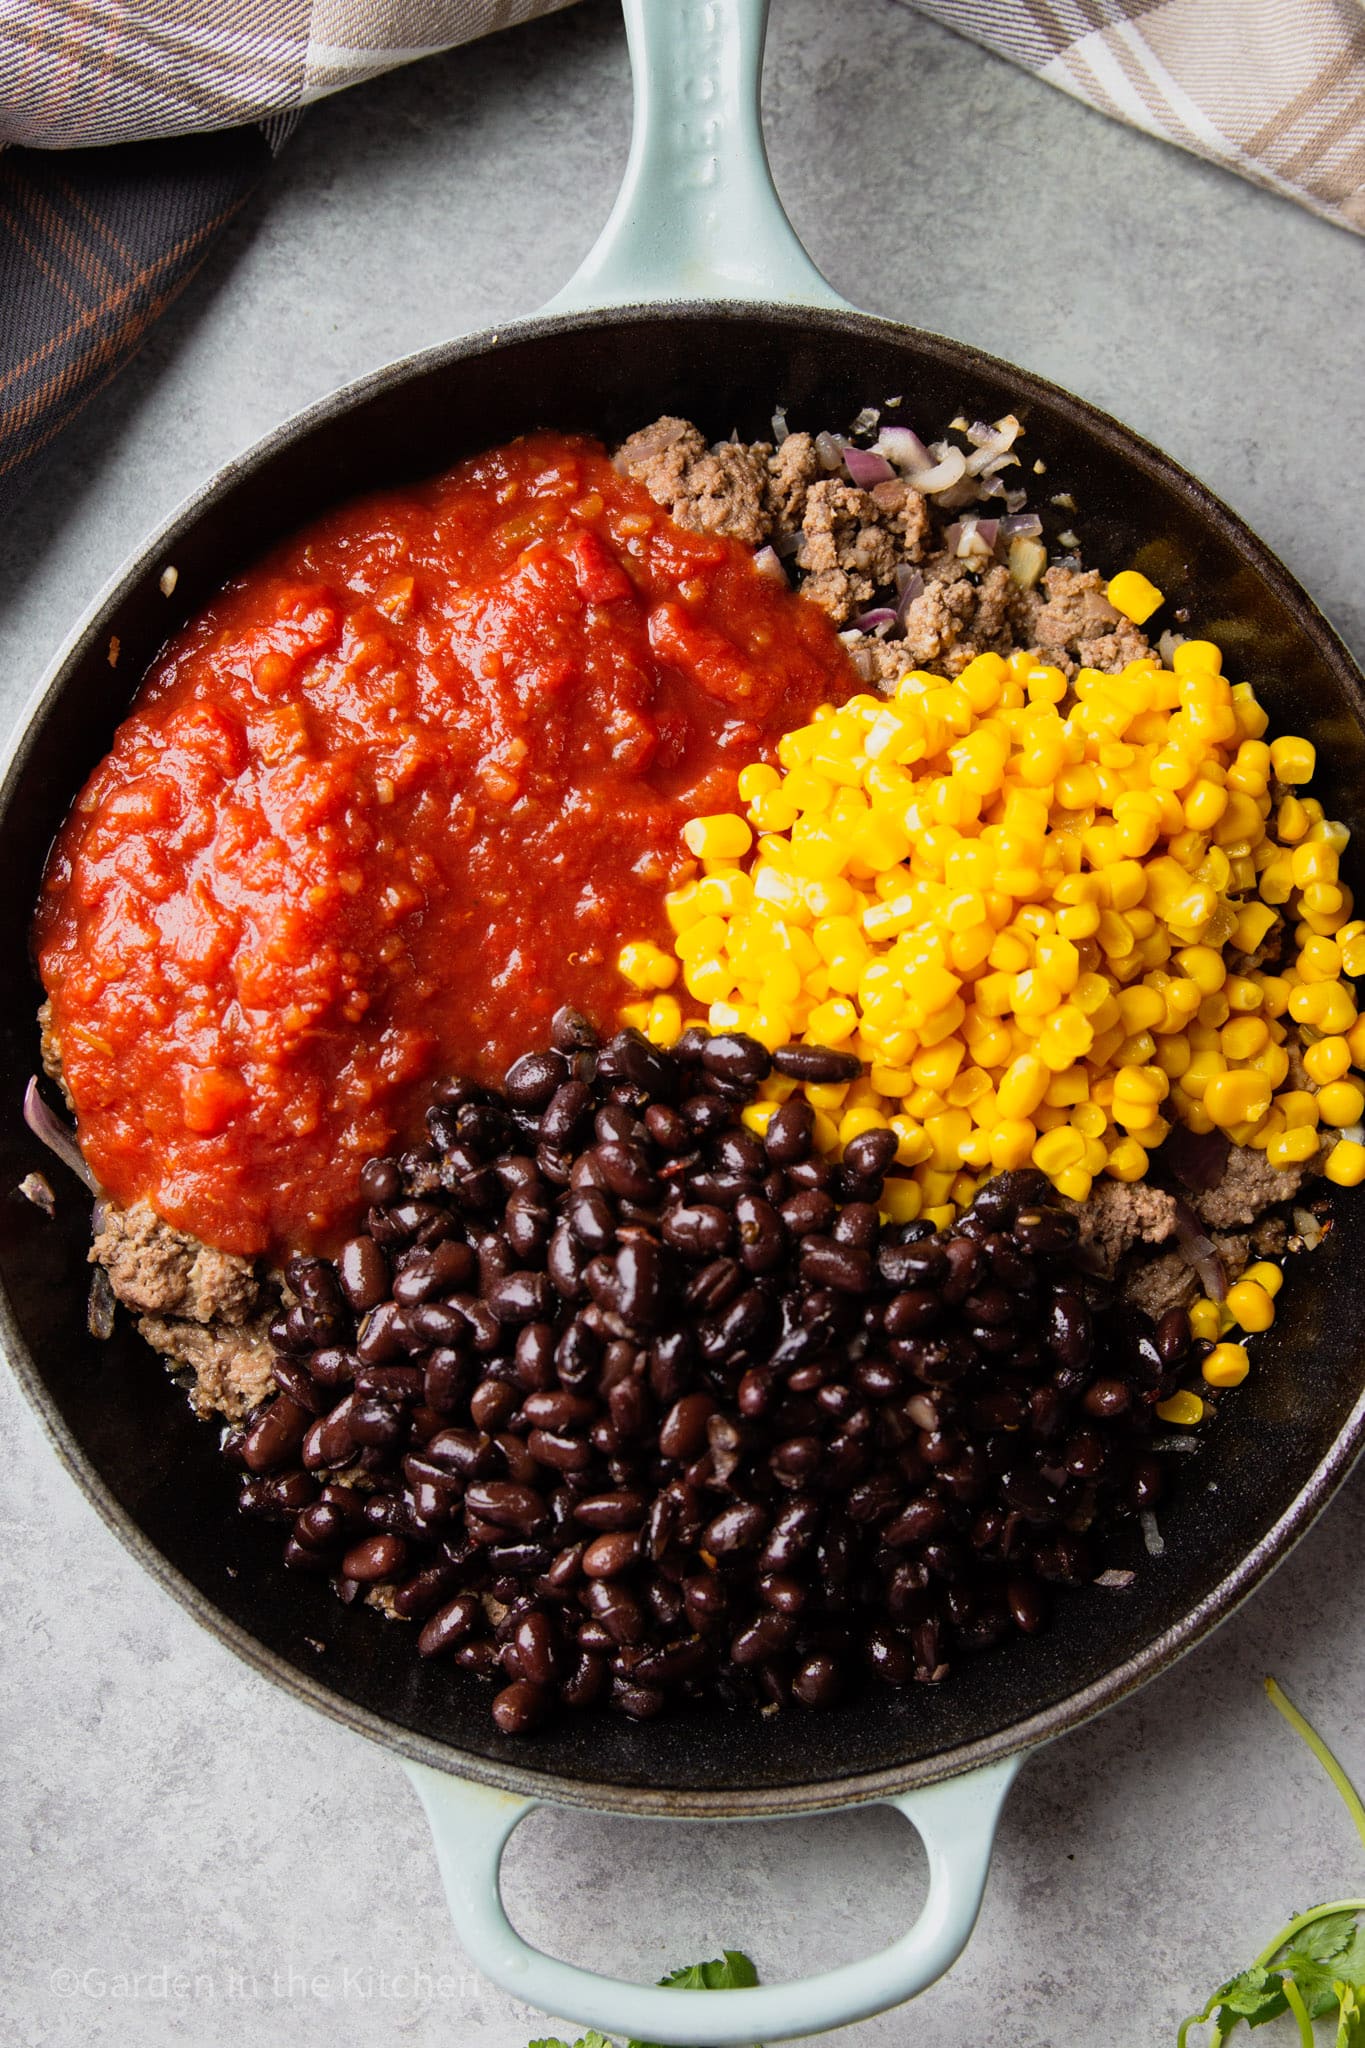 corn, black beans, and red salsa on top of cooked ground beef in a black skillet.